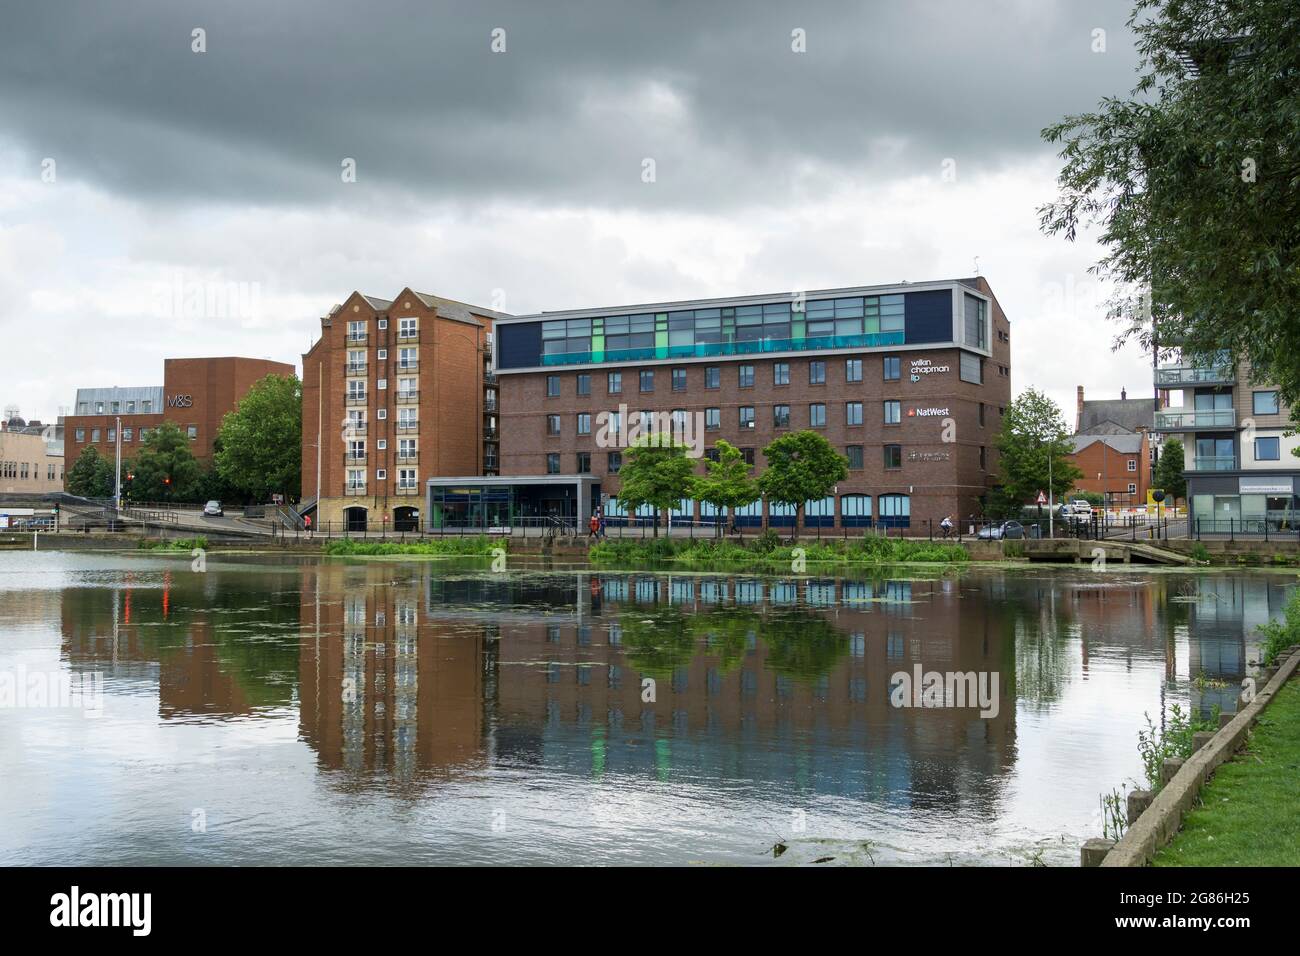 The Maltings office block and residential flats Brayford Lincoln city 2021 Stock Photo